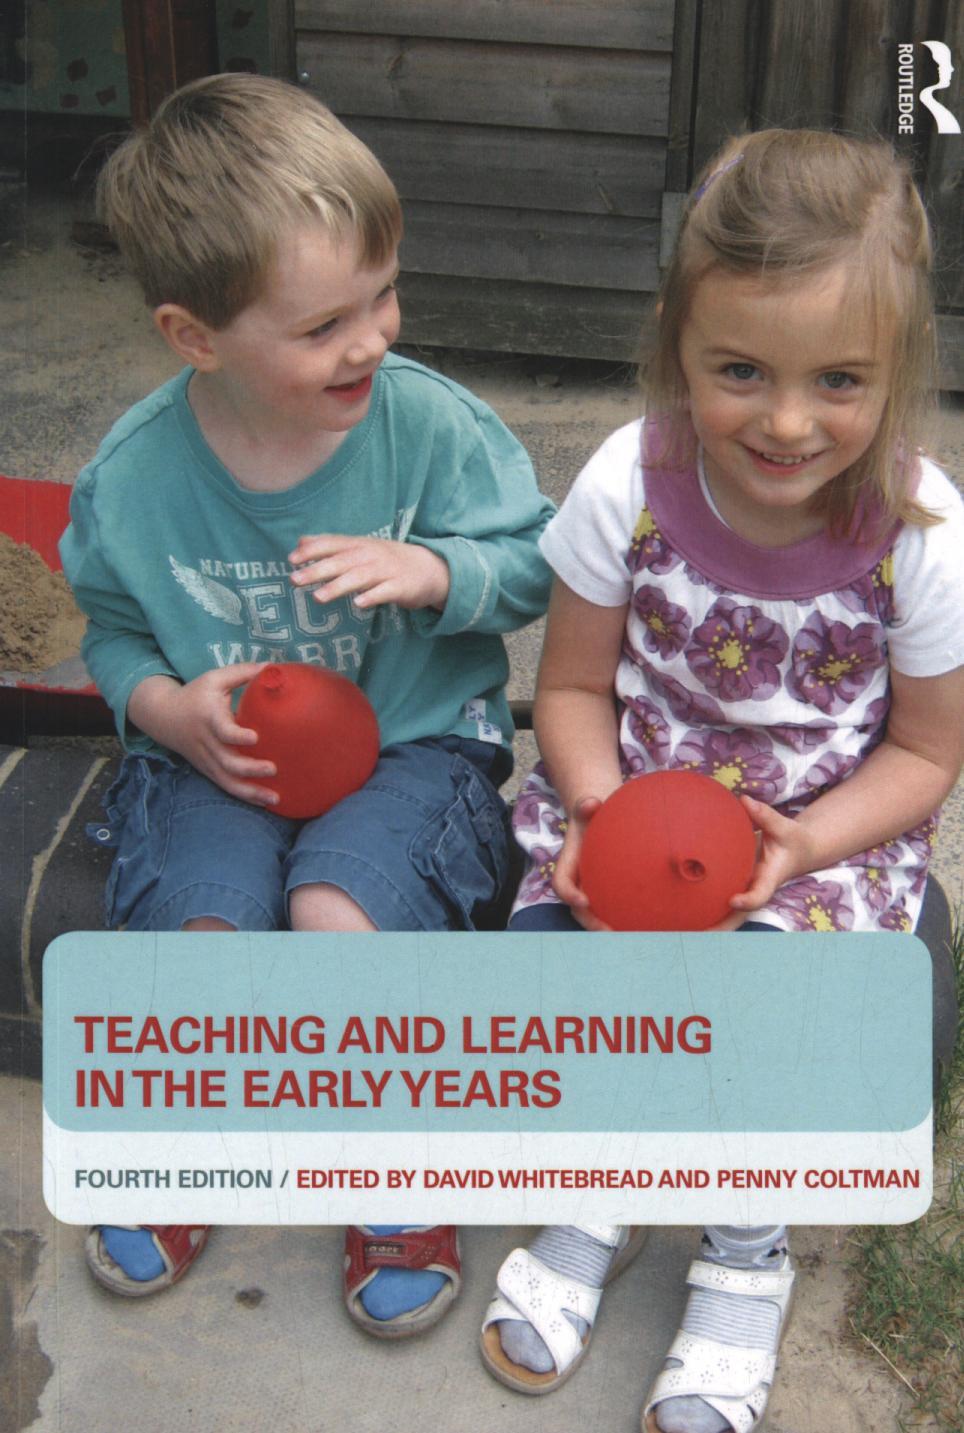 Teaching and Learning in the Early Years - David Whitebread & Penny Coltman